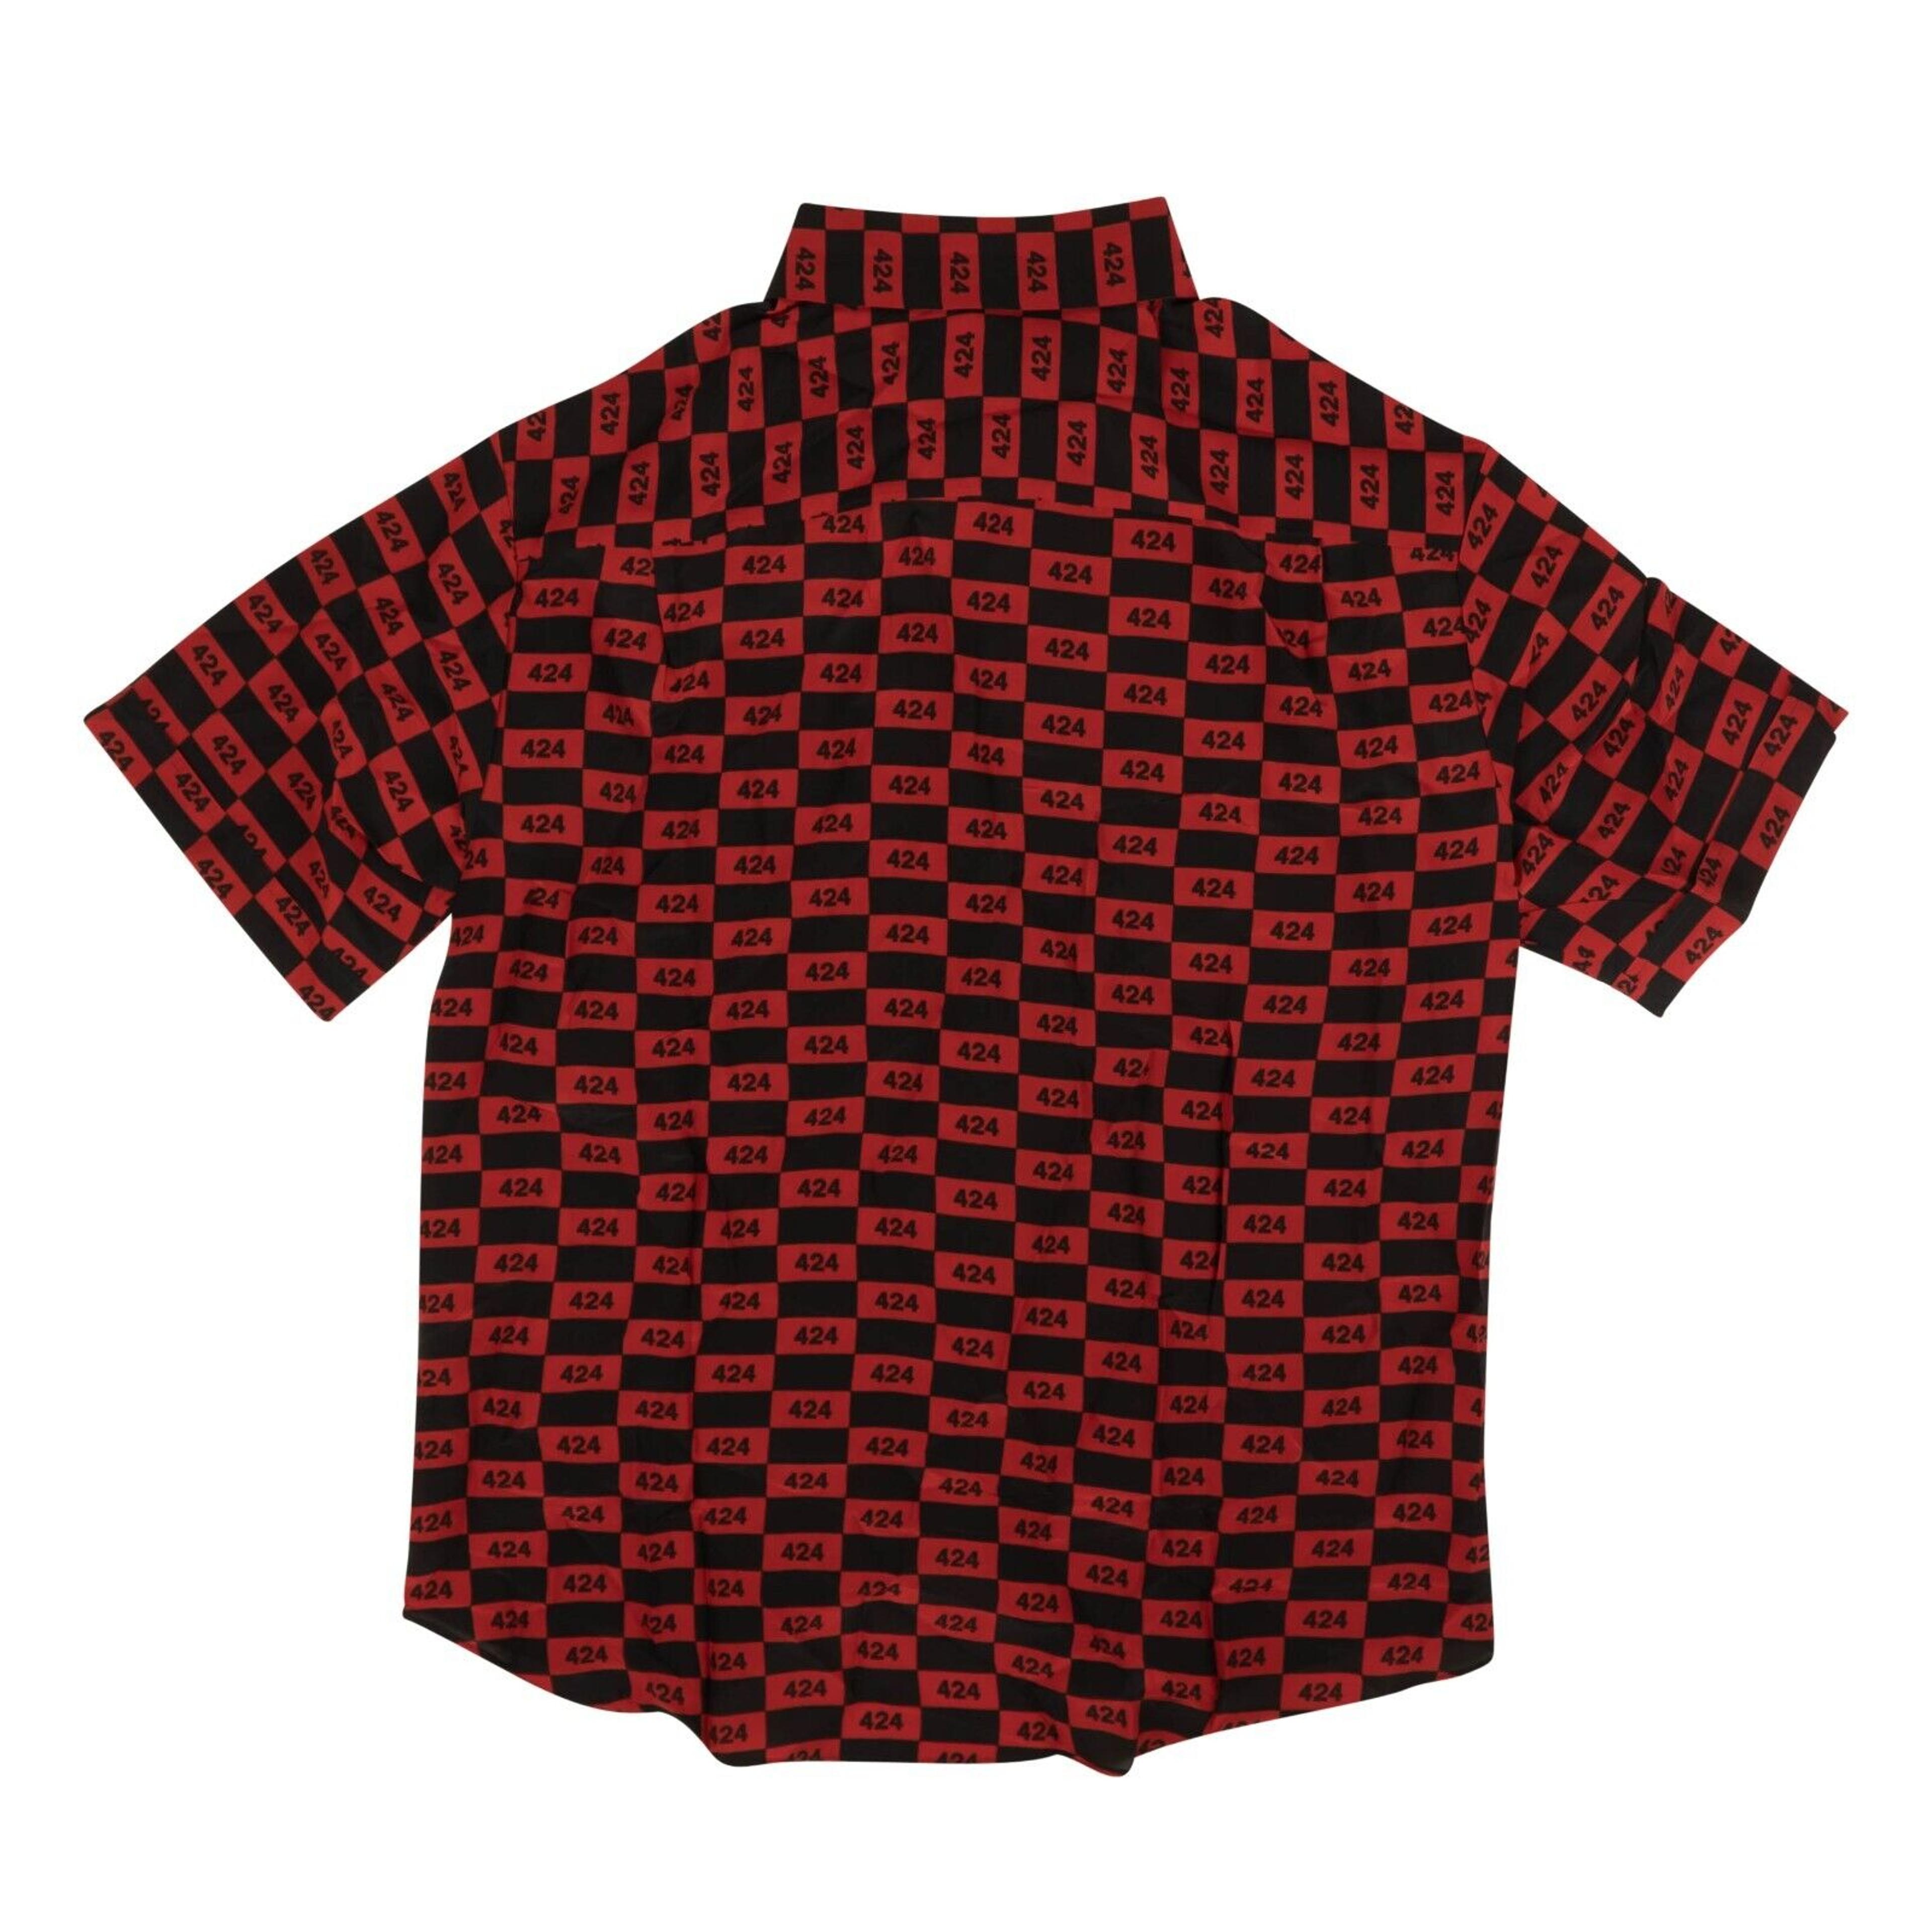 Alternate View 3 of 424 On Fairfax Men'S T-Shirts - Red/Black